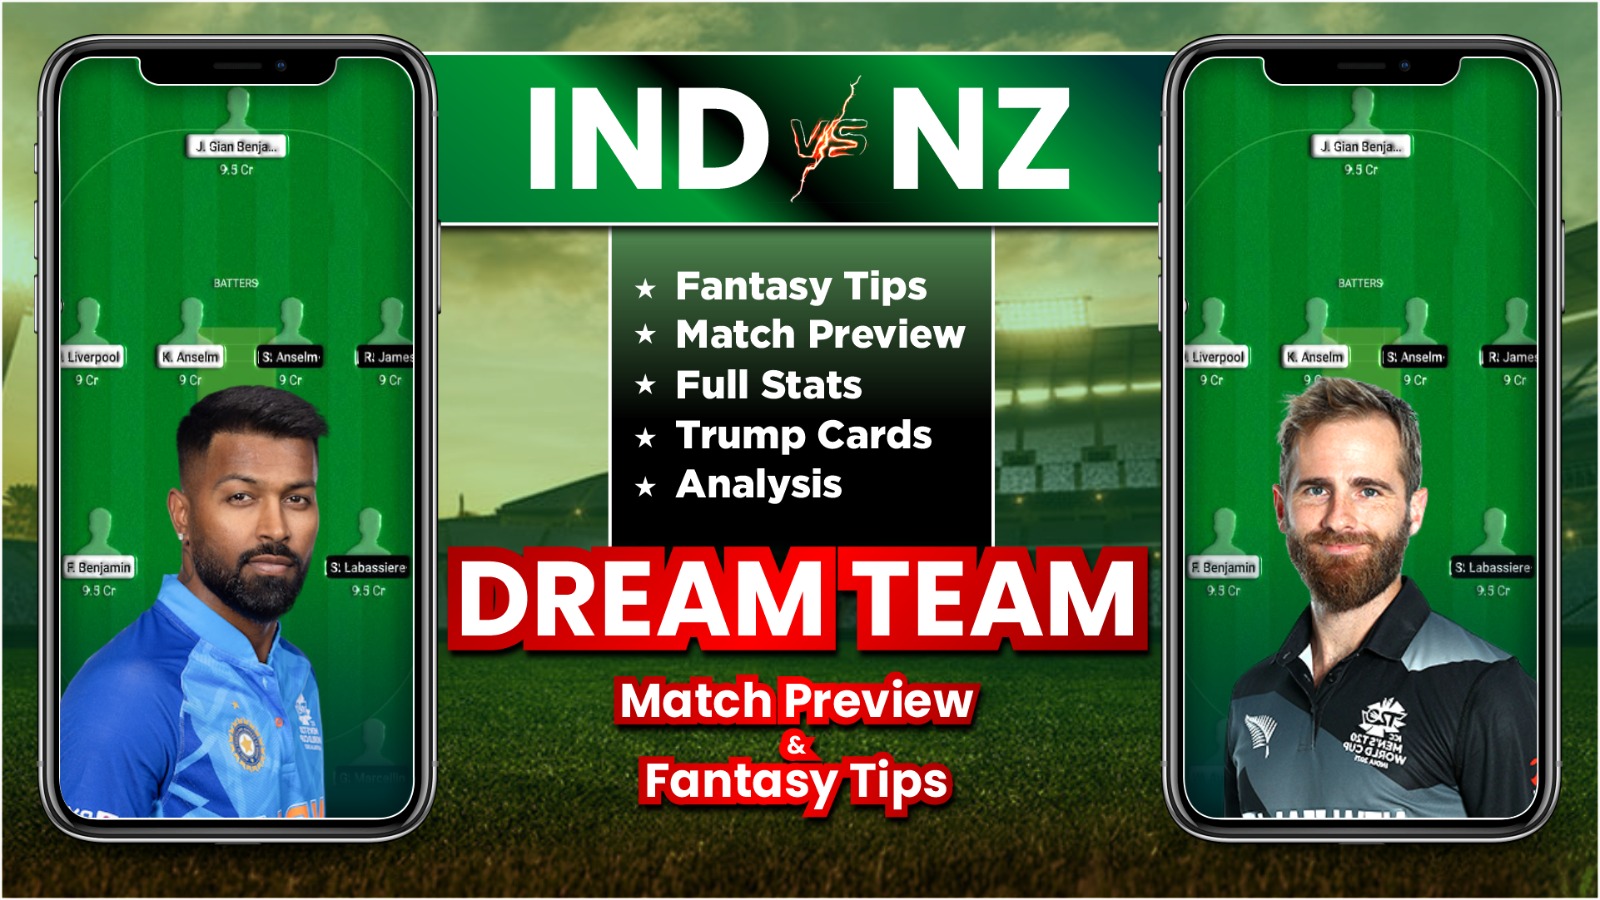 IND vs NZ 3rd T20I Dream11 Team Prediction, Player Stats, Possible 11 and IND vs NZ 1st T20I Fantasy Tips